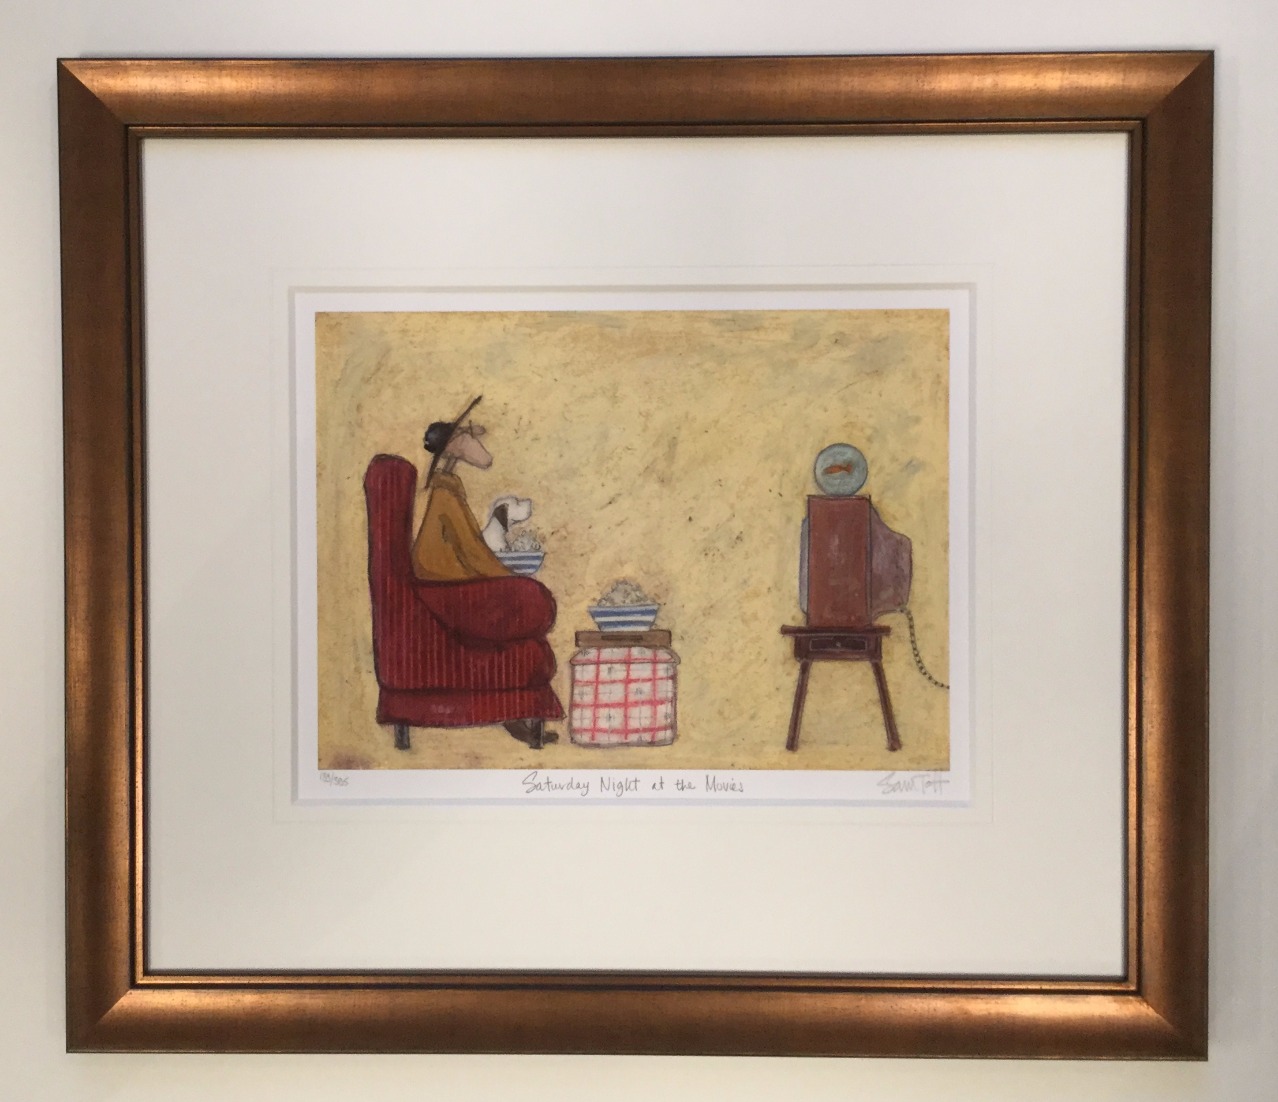 Saturday Night at the Movies by Sam Toft, Dog | Animals